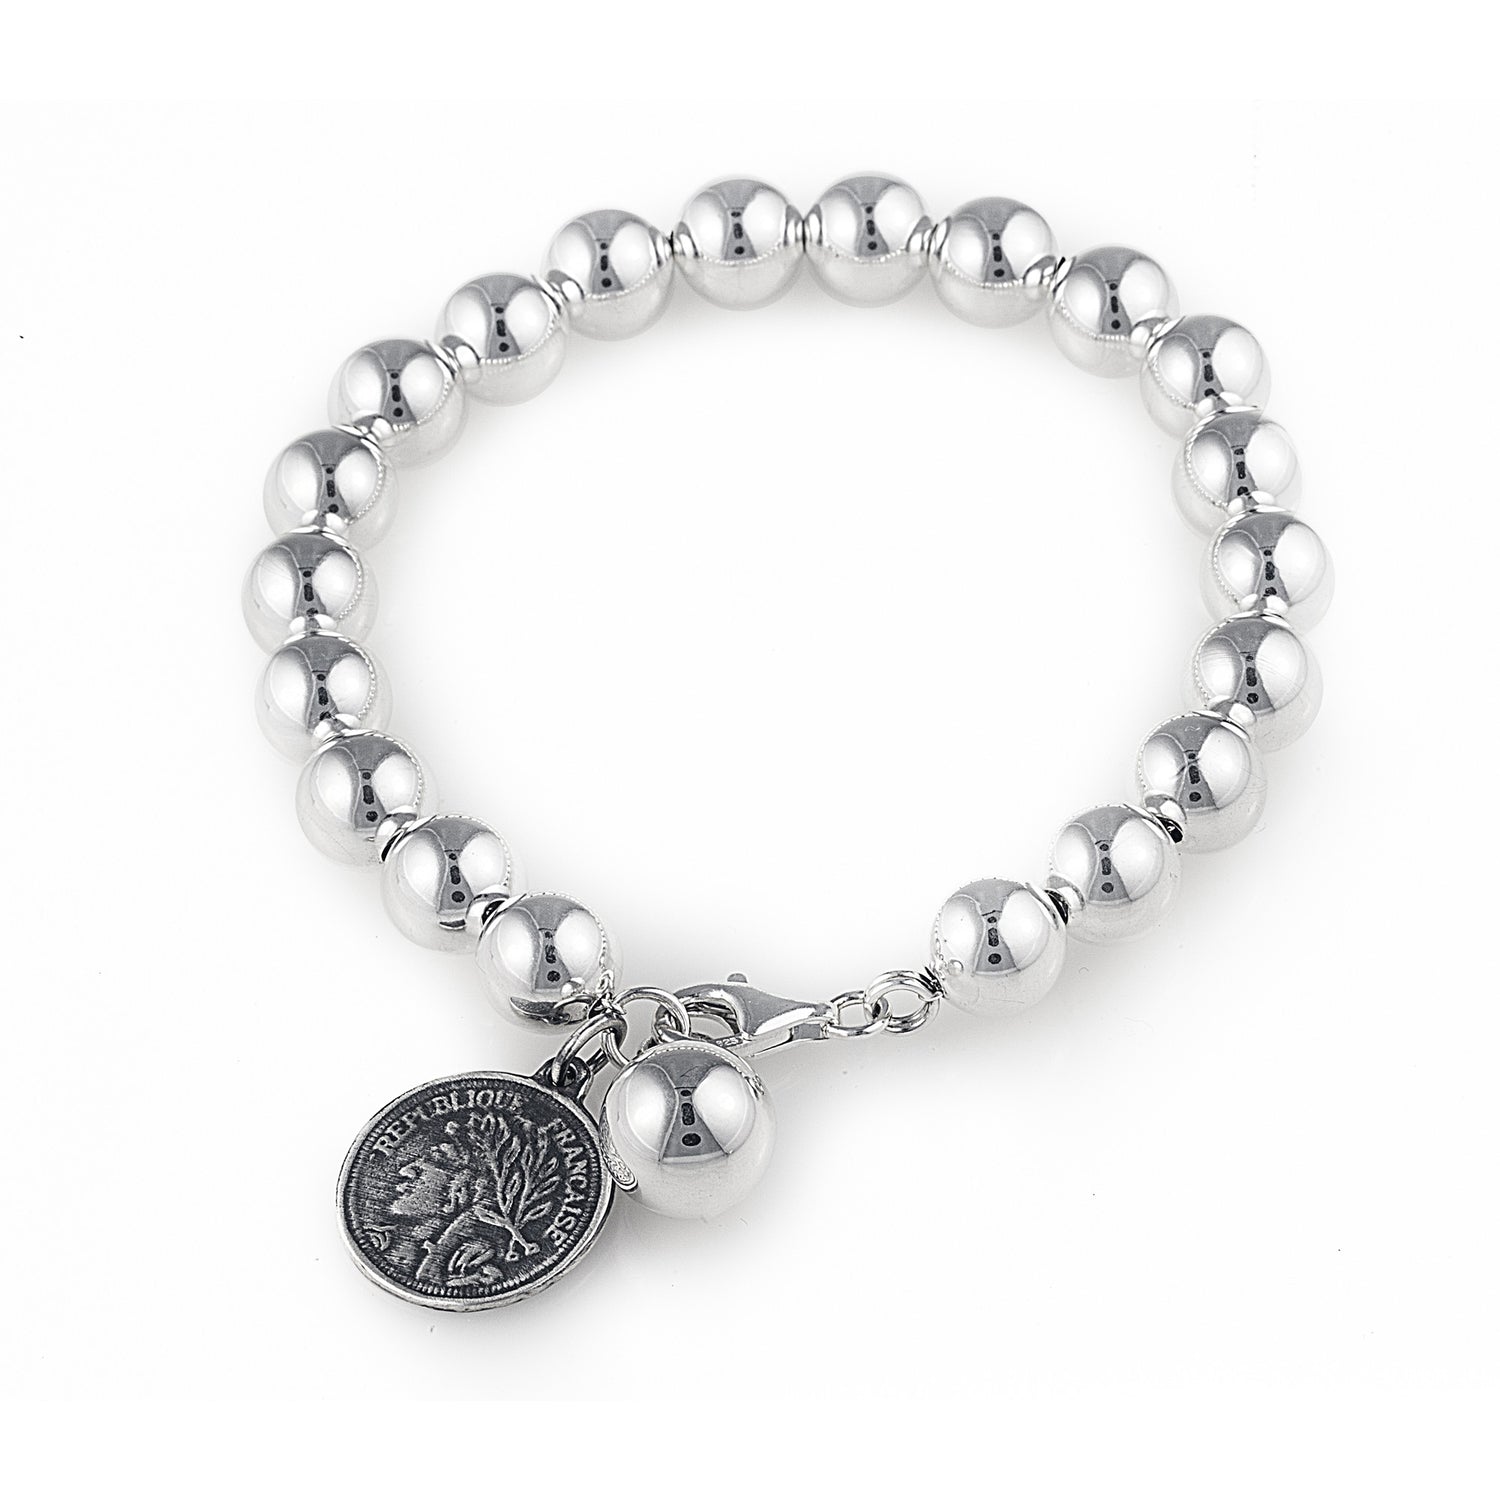 Medium Contessa Bracelet with Ball & Coin in 925 Sterling Silver with Ball and Coin. Bellagio & Co Jewellery. Worldwide shipping.